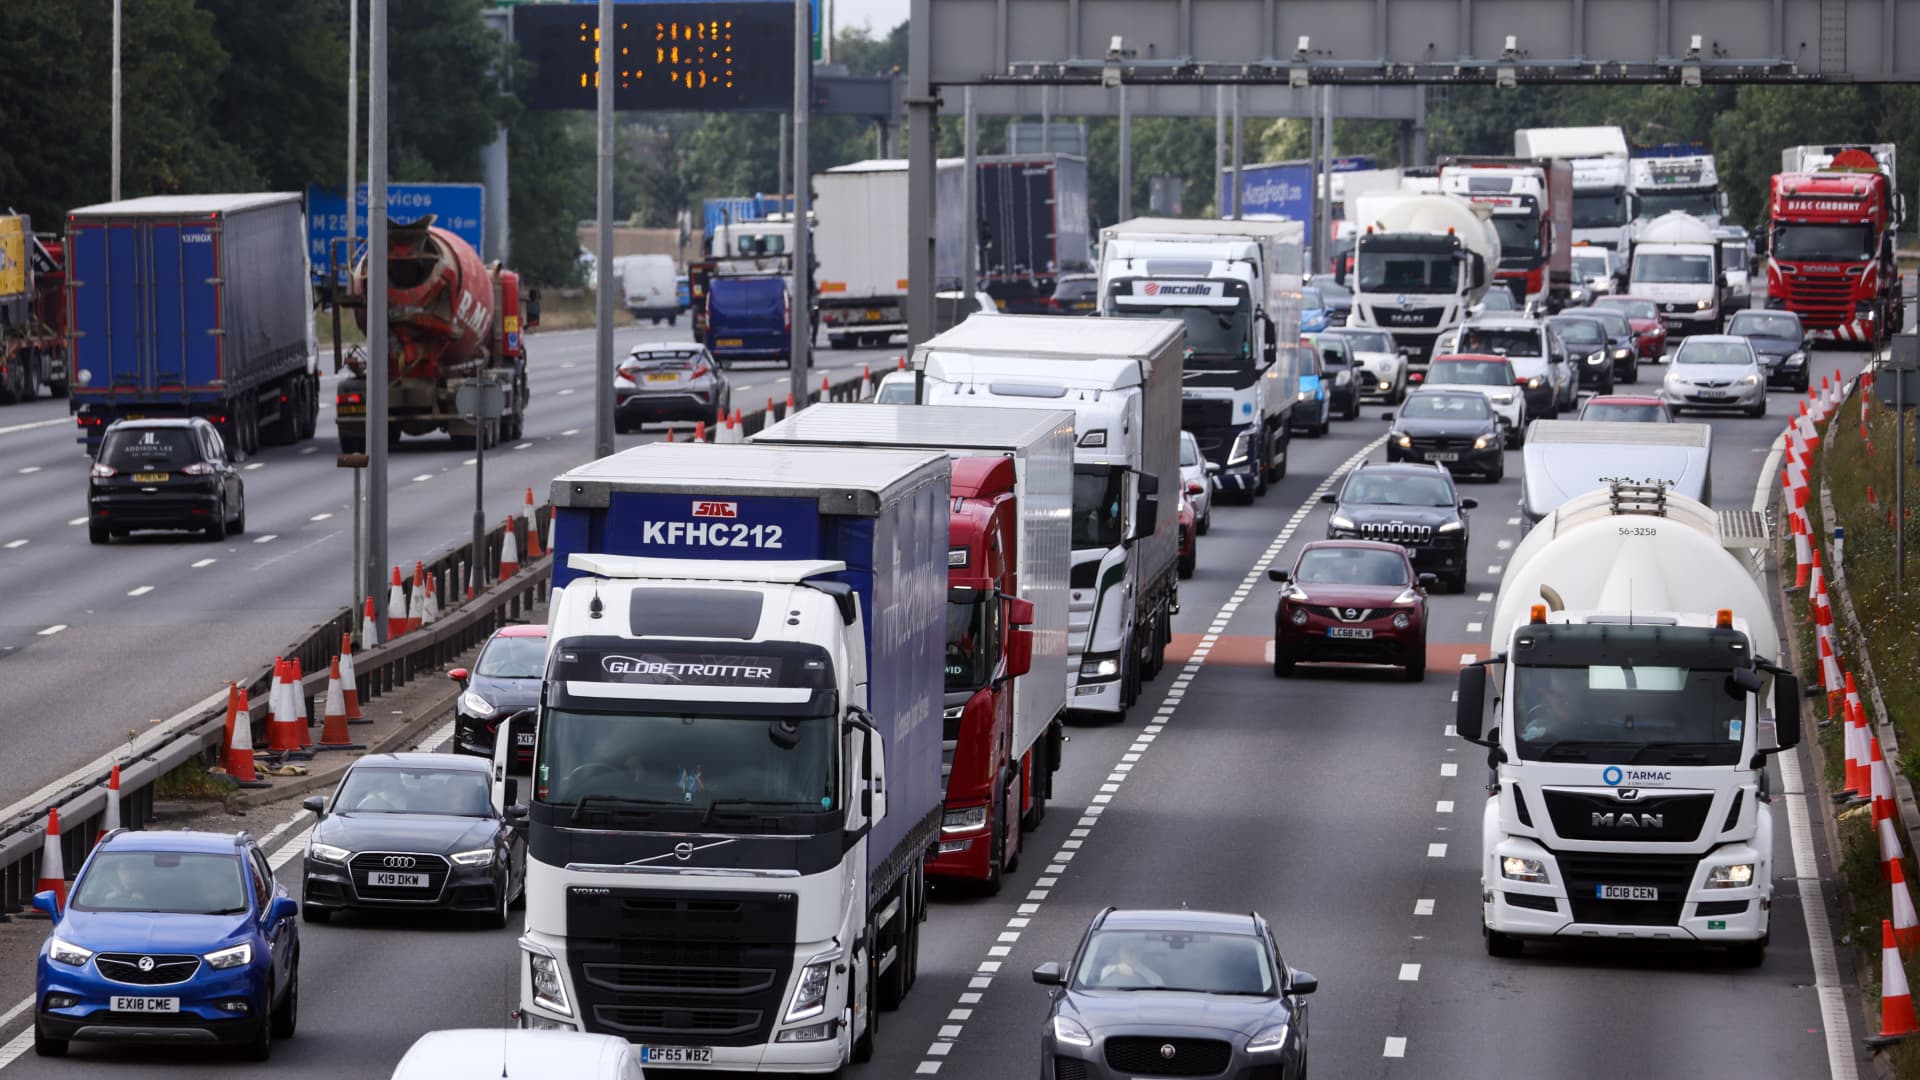 Trucks and automobiles approach the Dartford tunnel in the U.K. on Sept. 3, 2021.